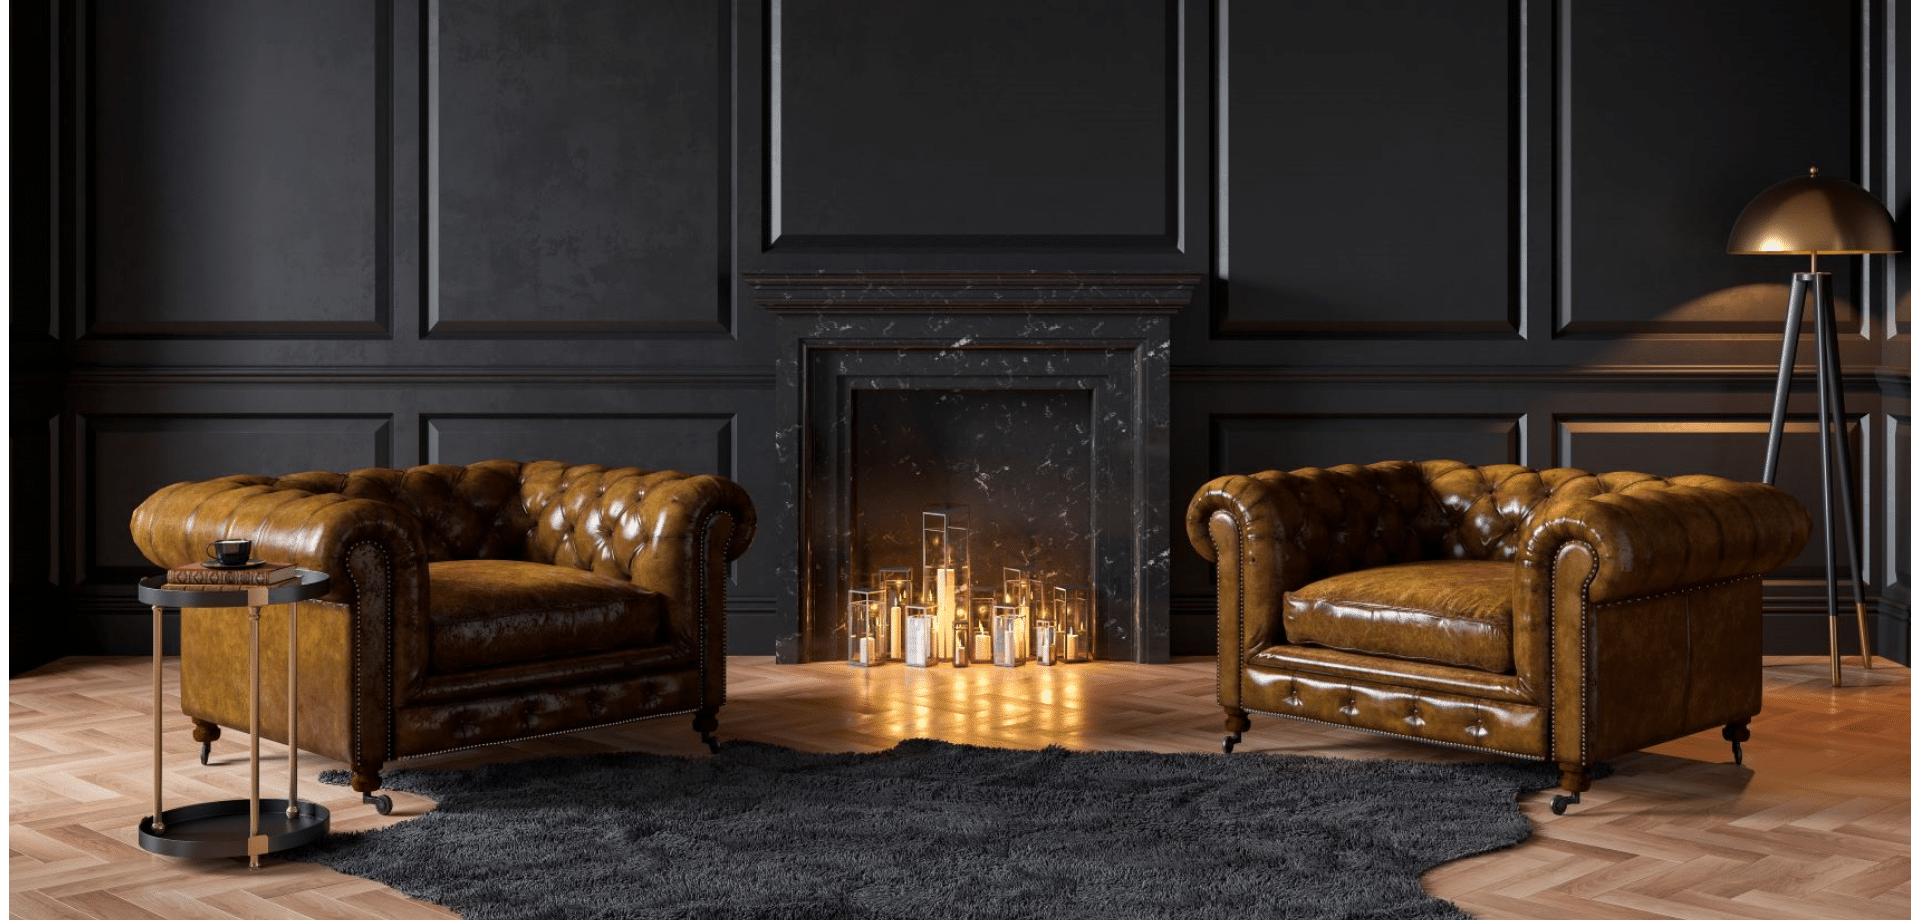 Two leather armchairs in front of a fireplace filled with lit candles